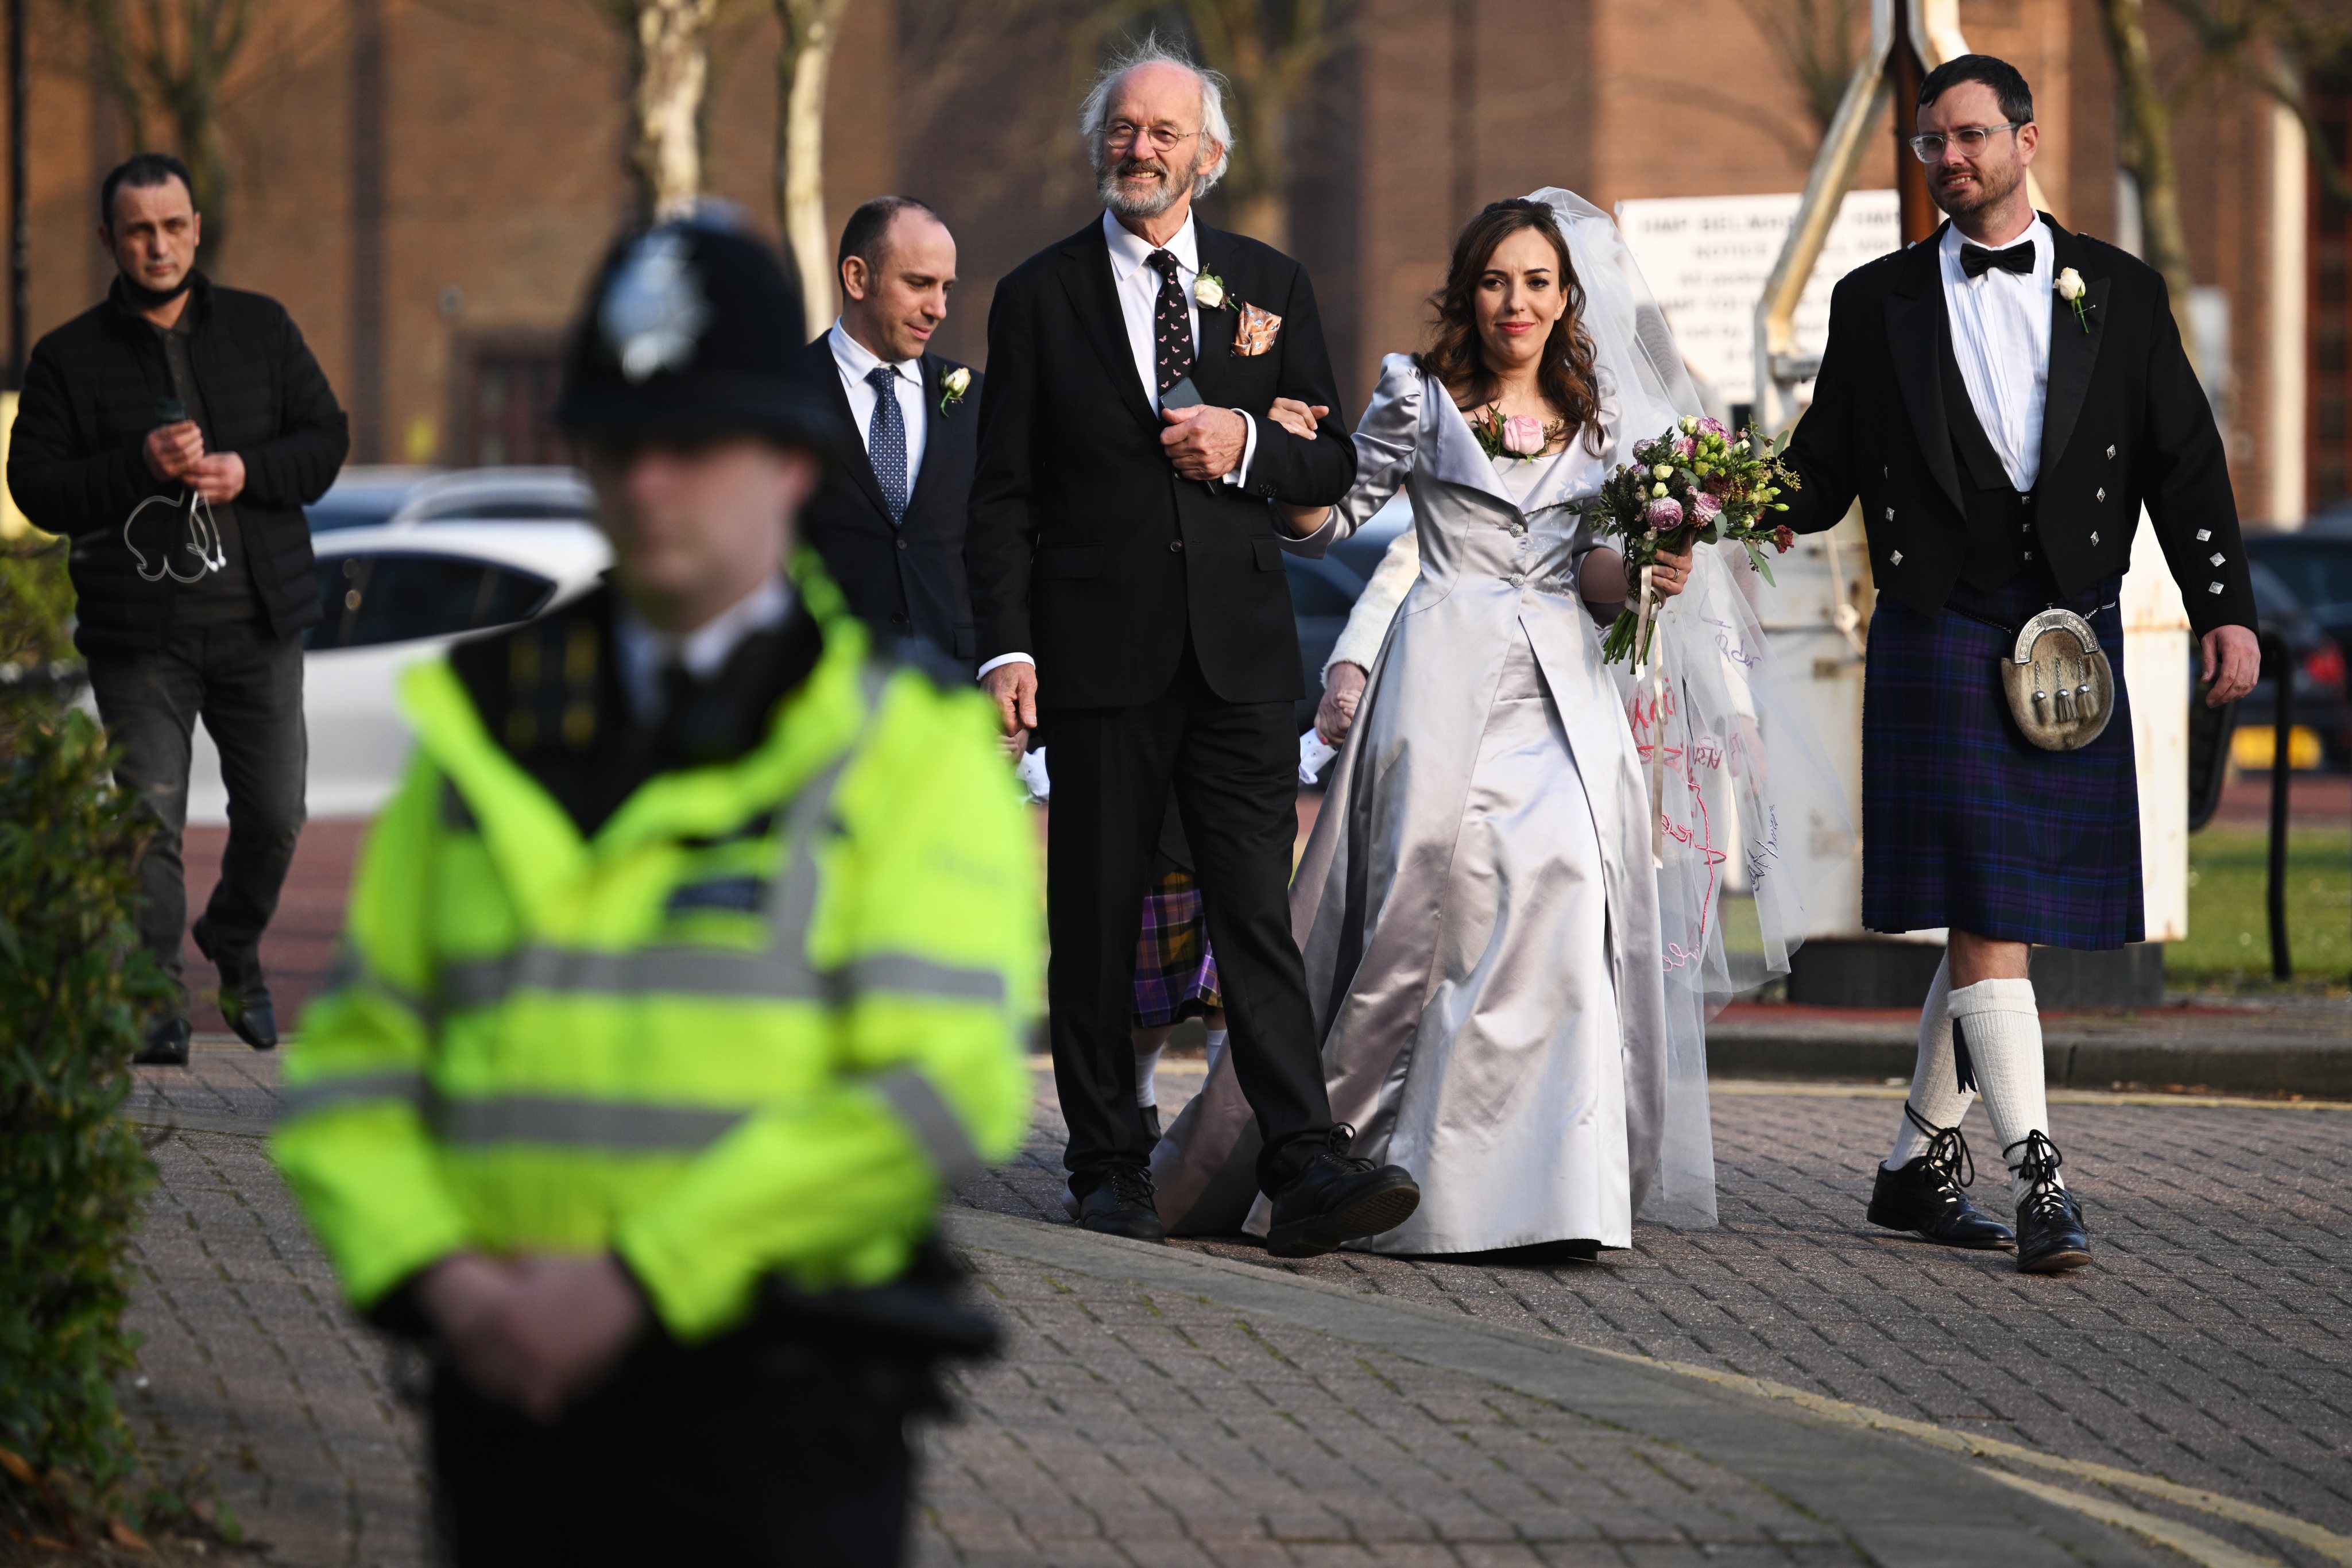 Assange Supporters Gather At Belmarsh Prison As He Weds Partner